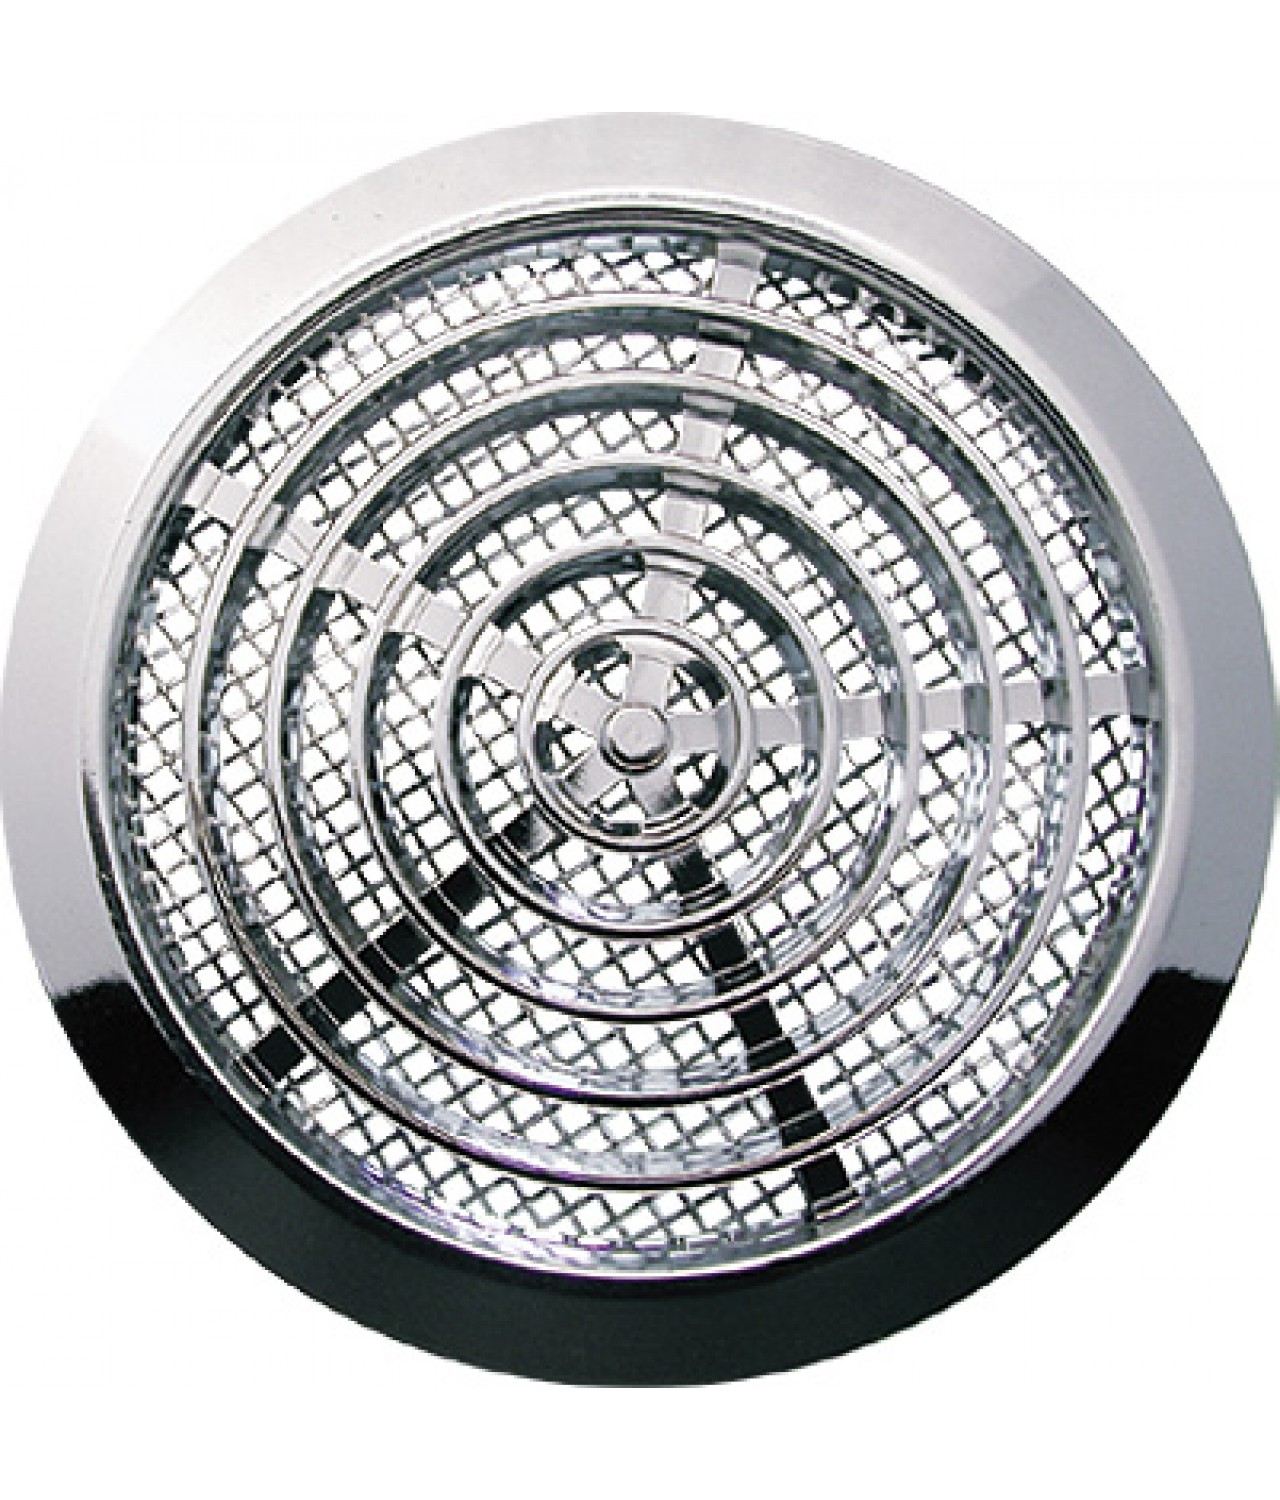 Air vent cover GRT76, Ø80/92 mm - metalized silver